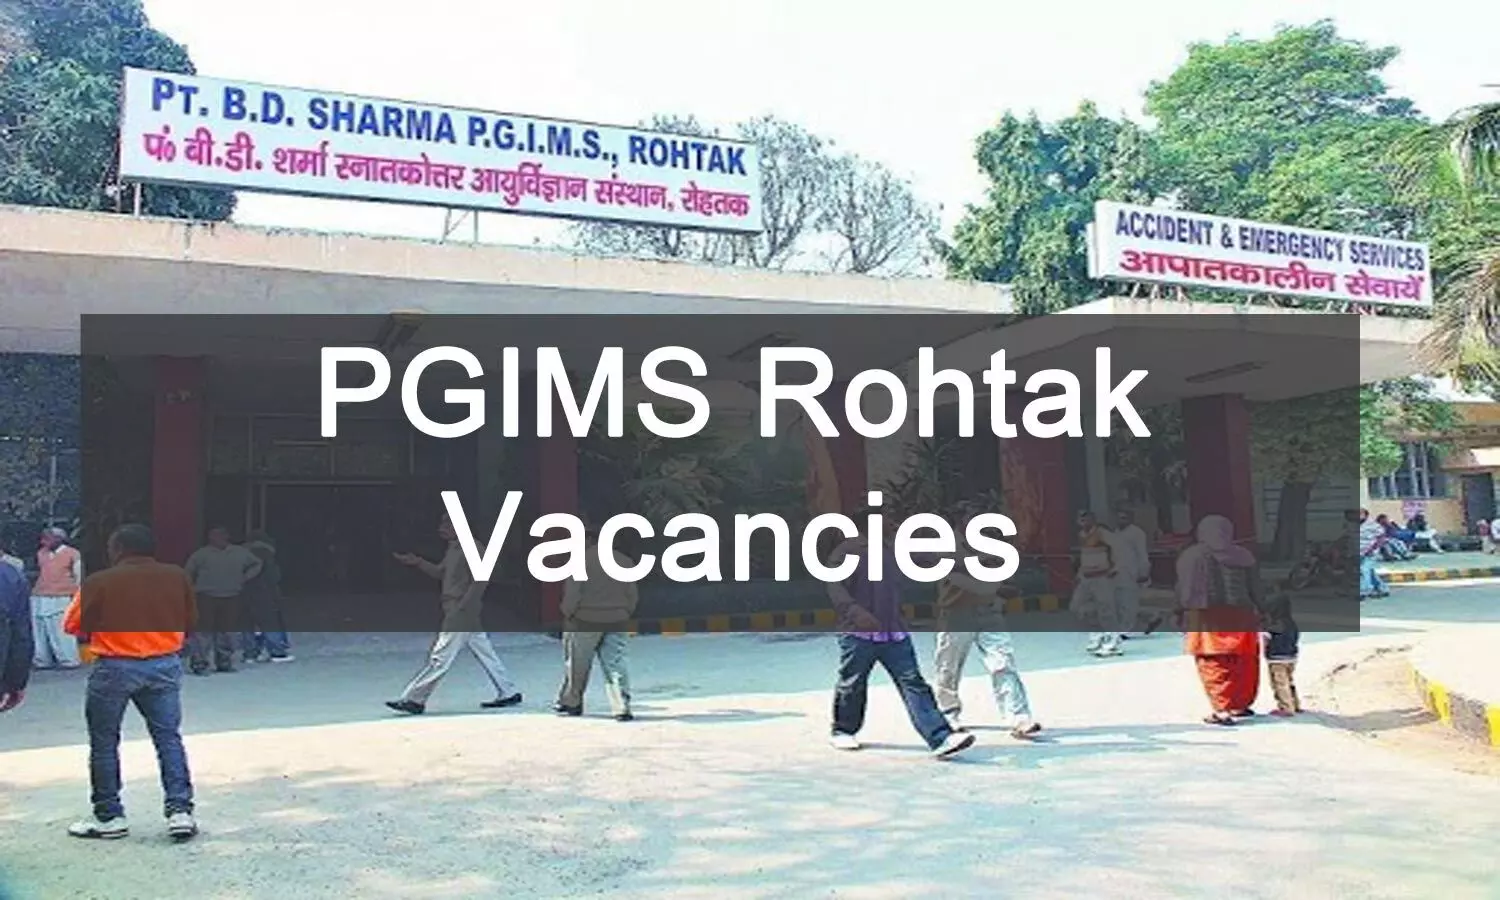 Walk In Interview At PGIMS Rohtak: Vacancies Released For Medical Officer Post, Apply Now